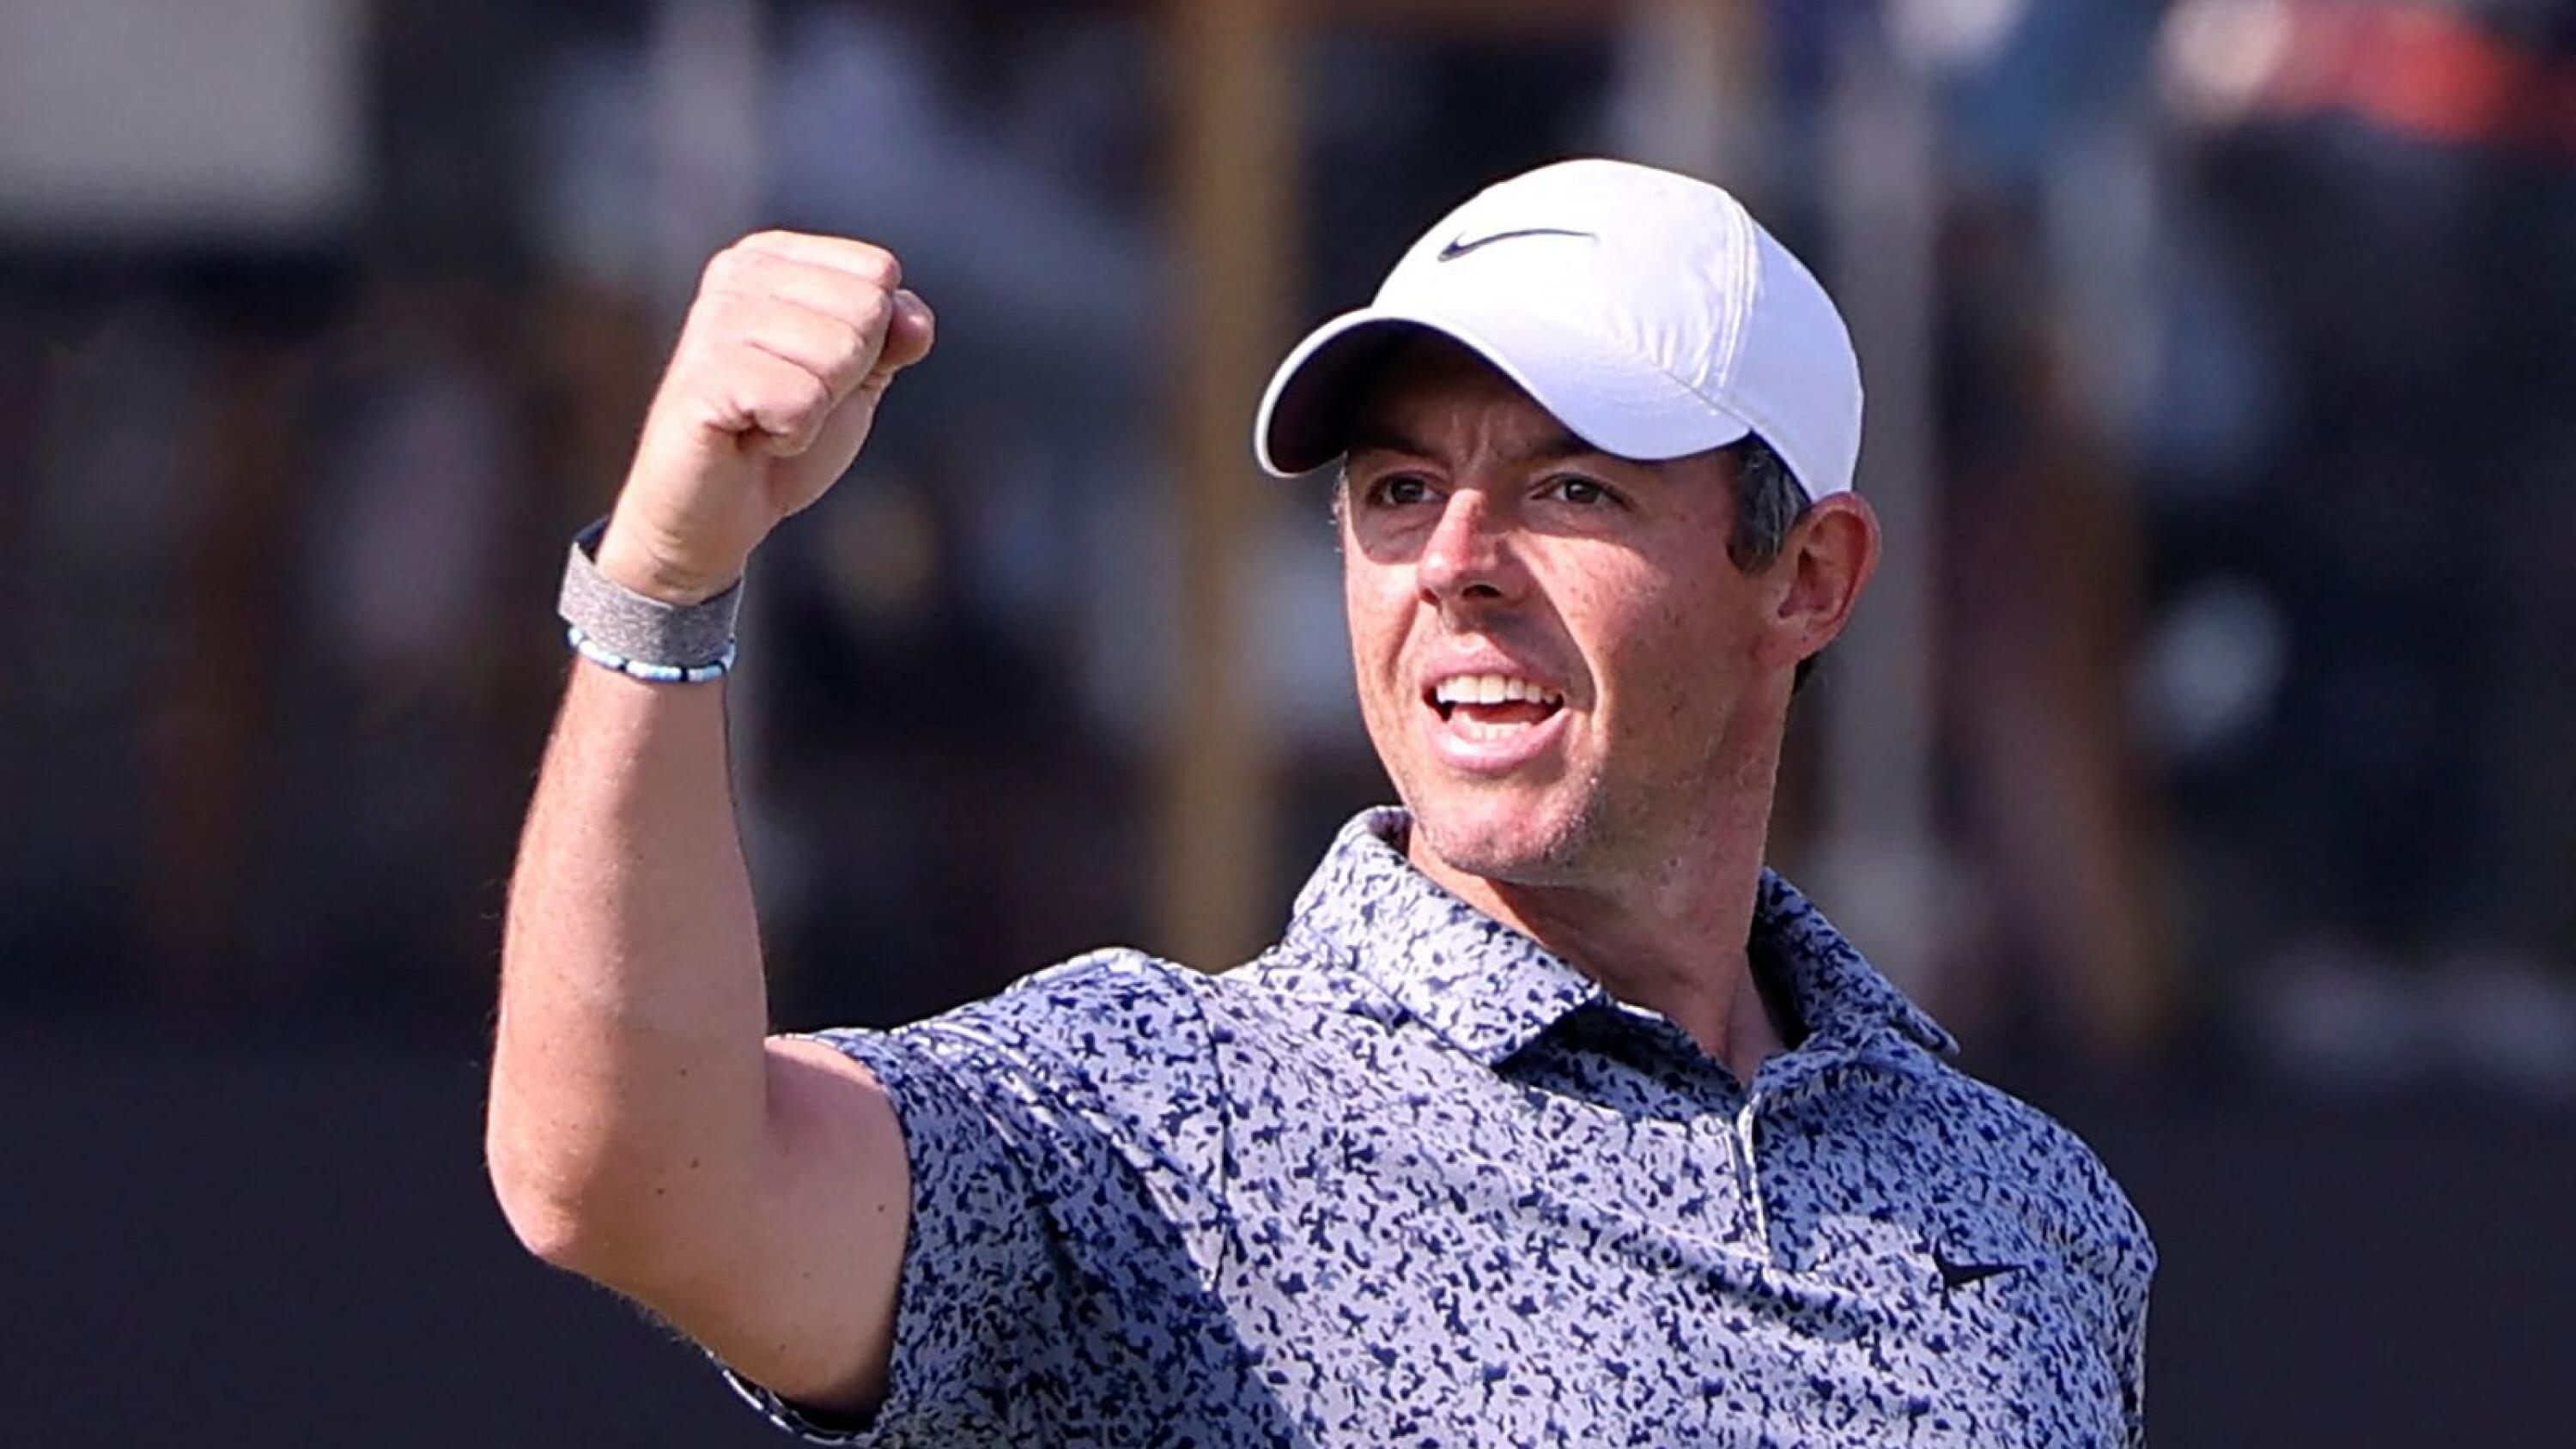 Rory McIlroy celebrates after winning the Dubai Desert Classic at the Emirates Golf Club on Monday.